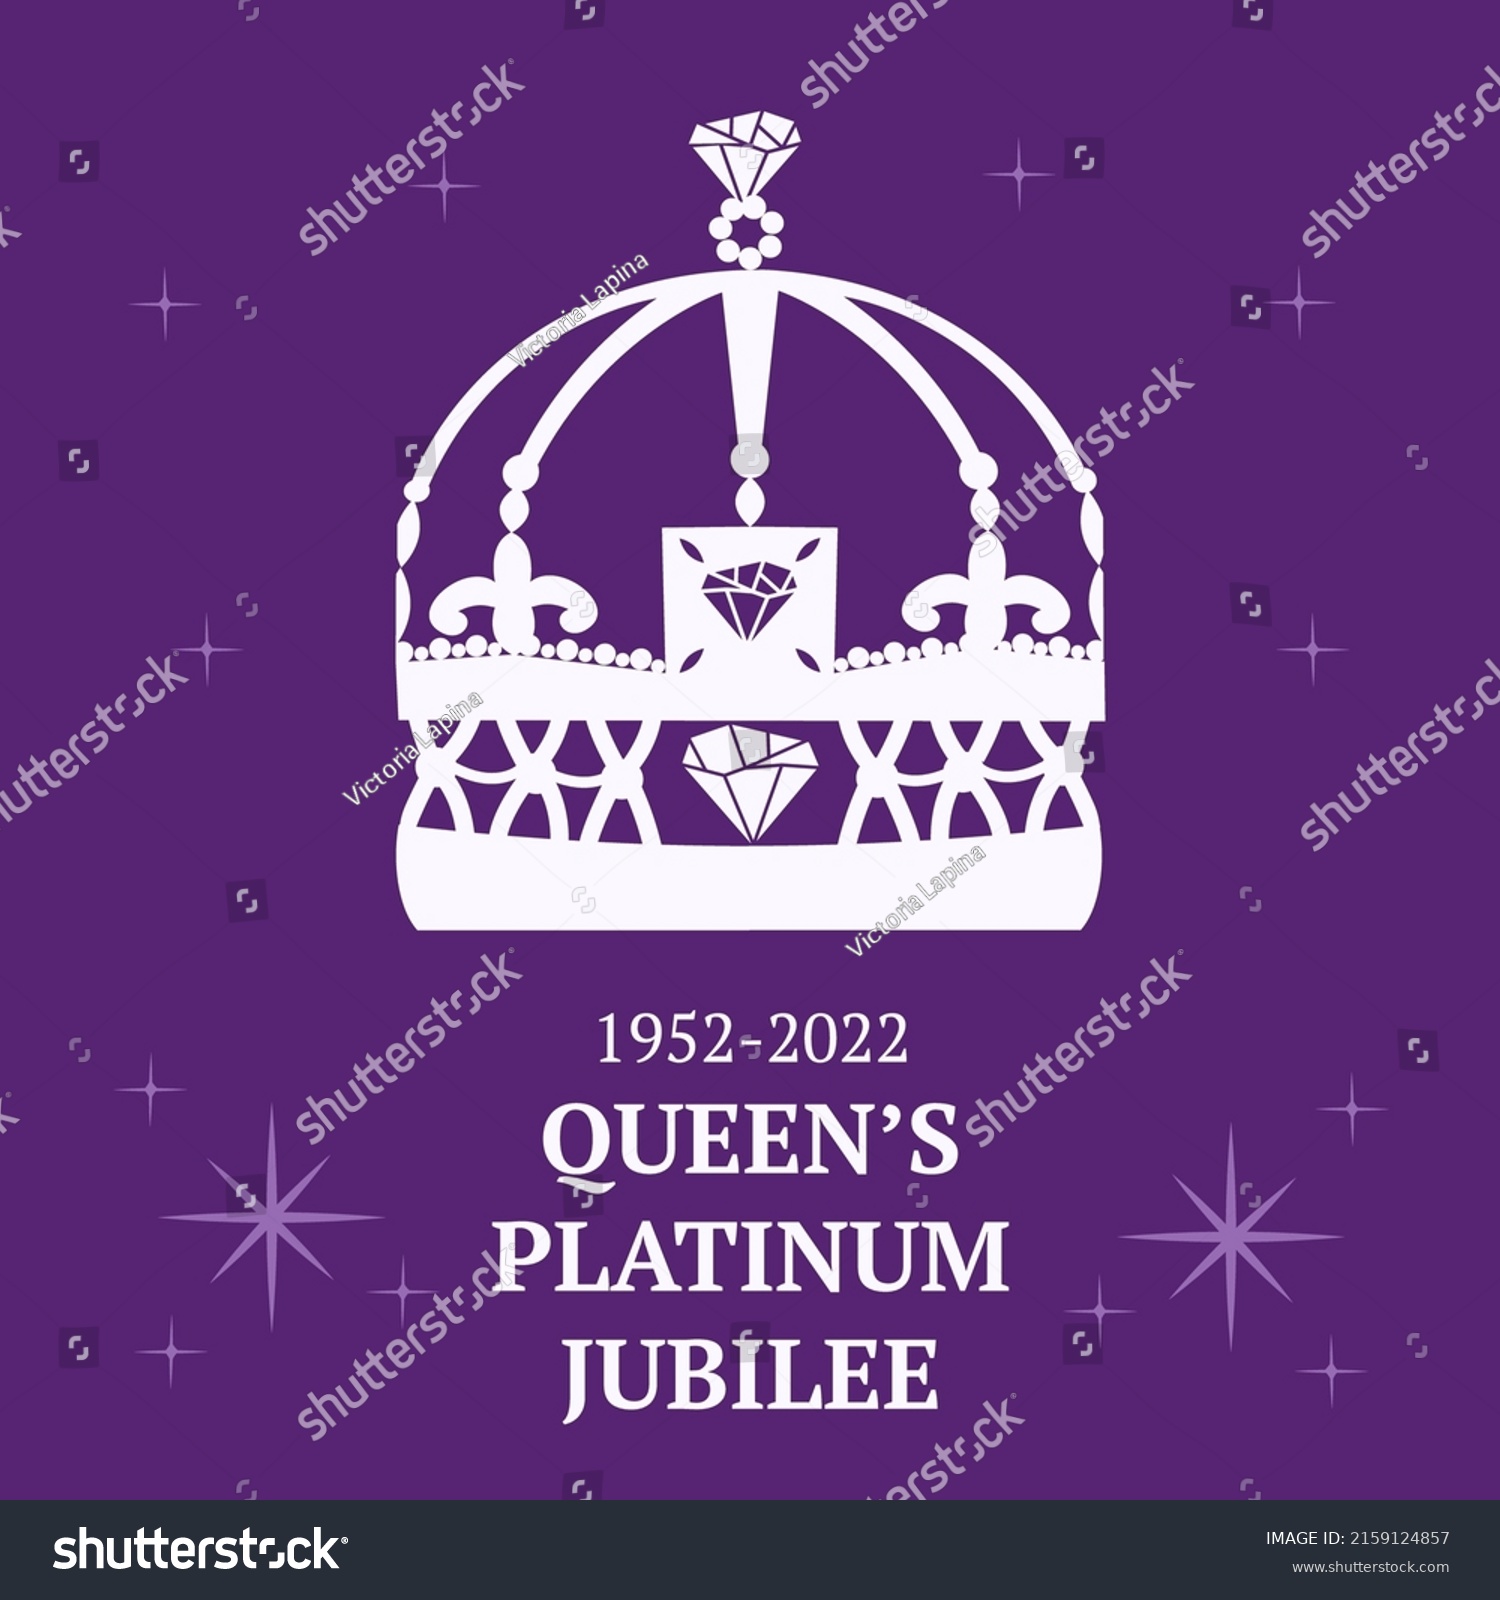 SVG of The Queen's Platinum Jubilee celebration banner of crown. Vector illustration for banners, flayers, social media, stickers, greeting cards. svg